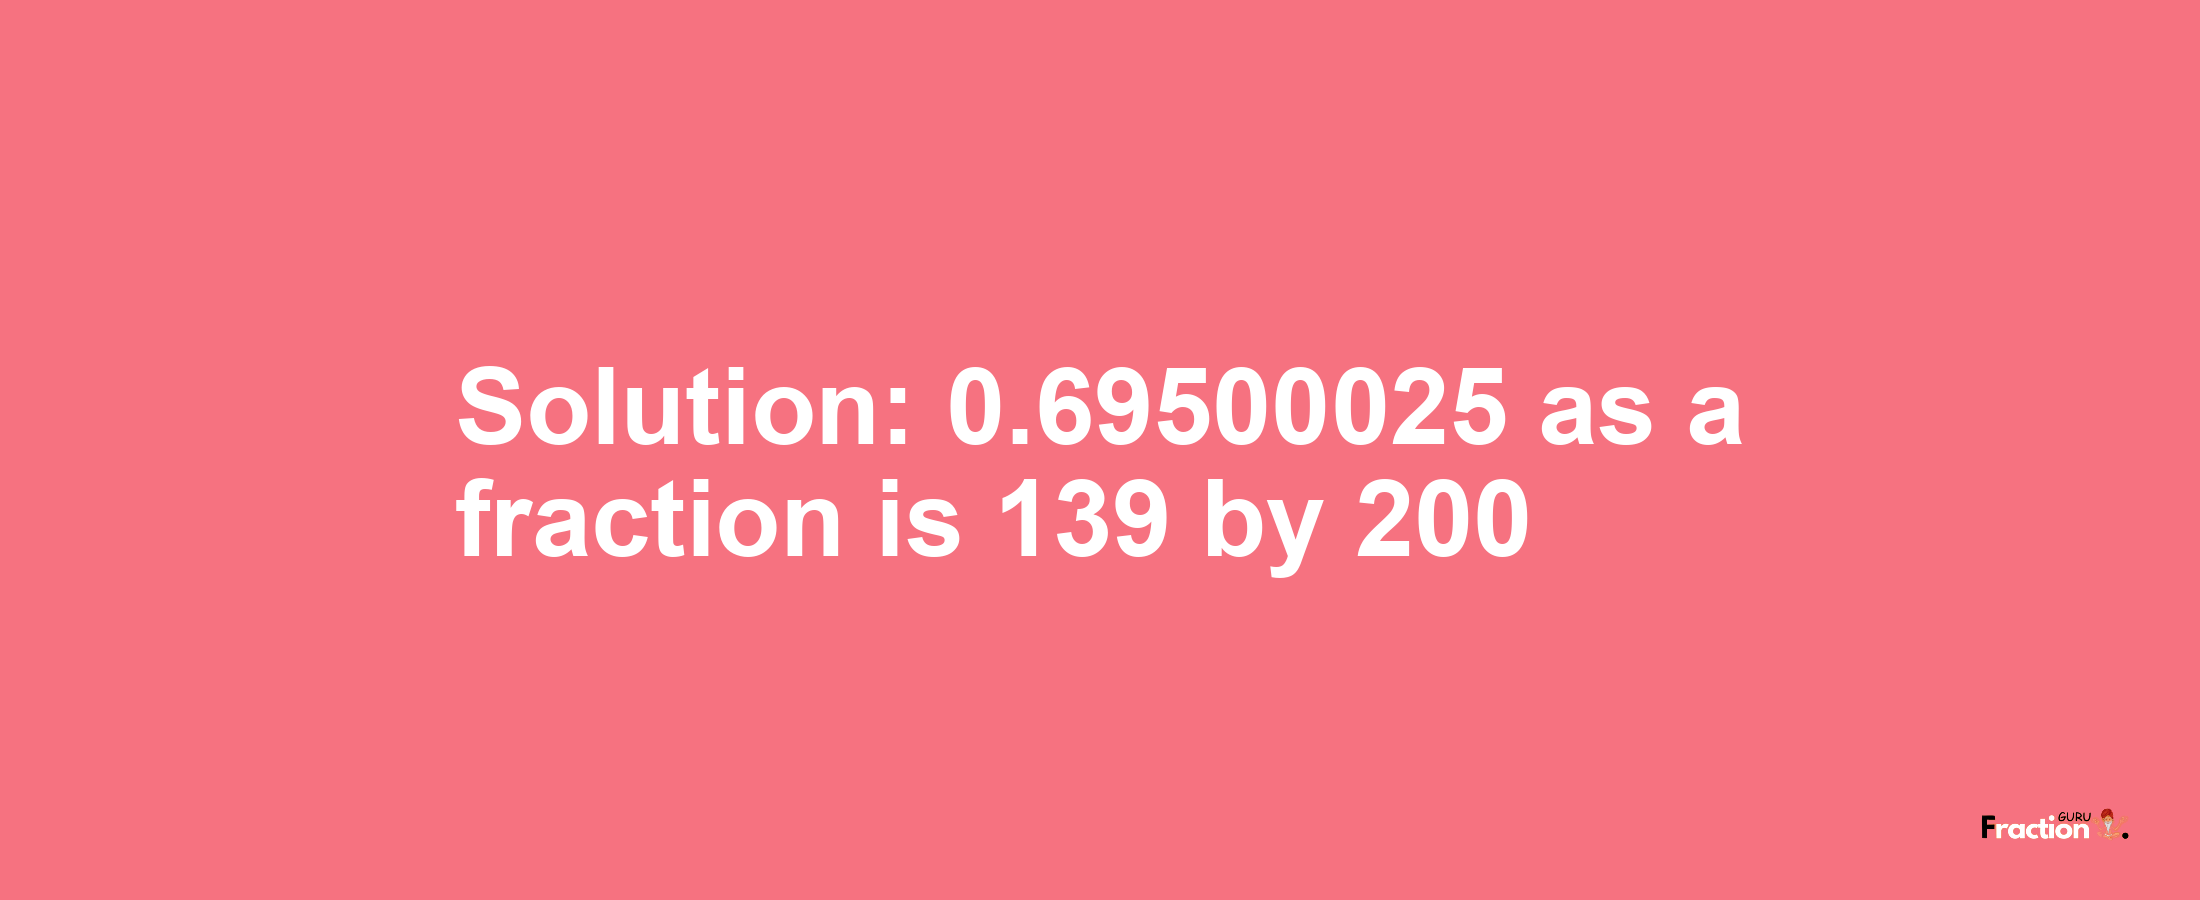 Solution:0.69500025 as a fraction is 139/200